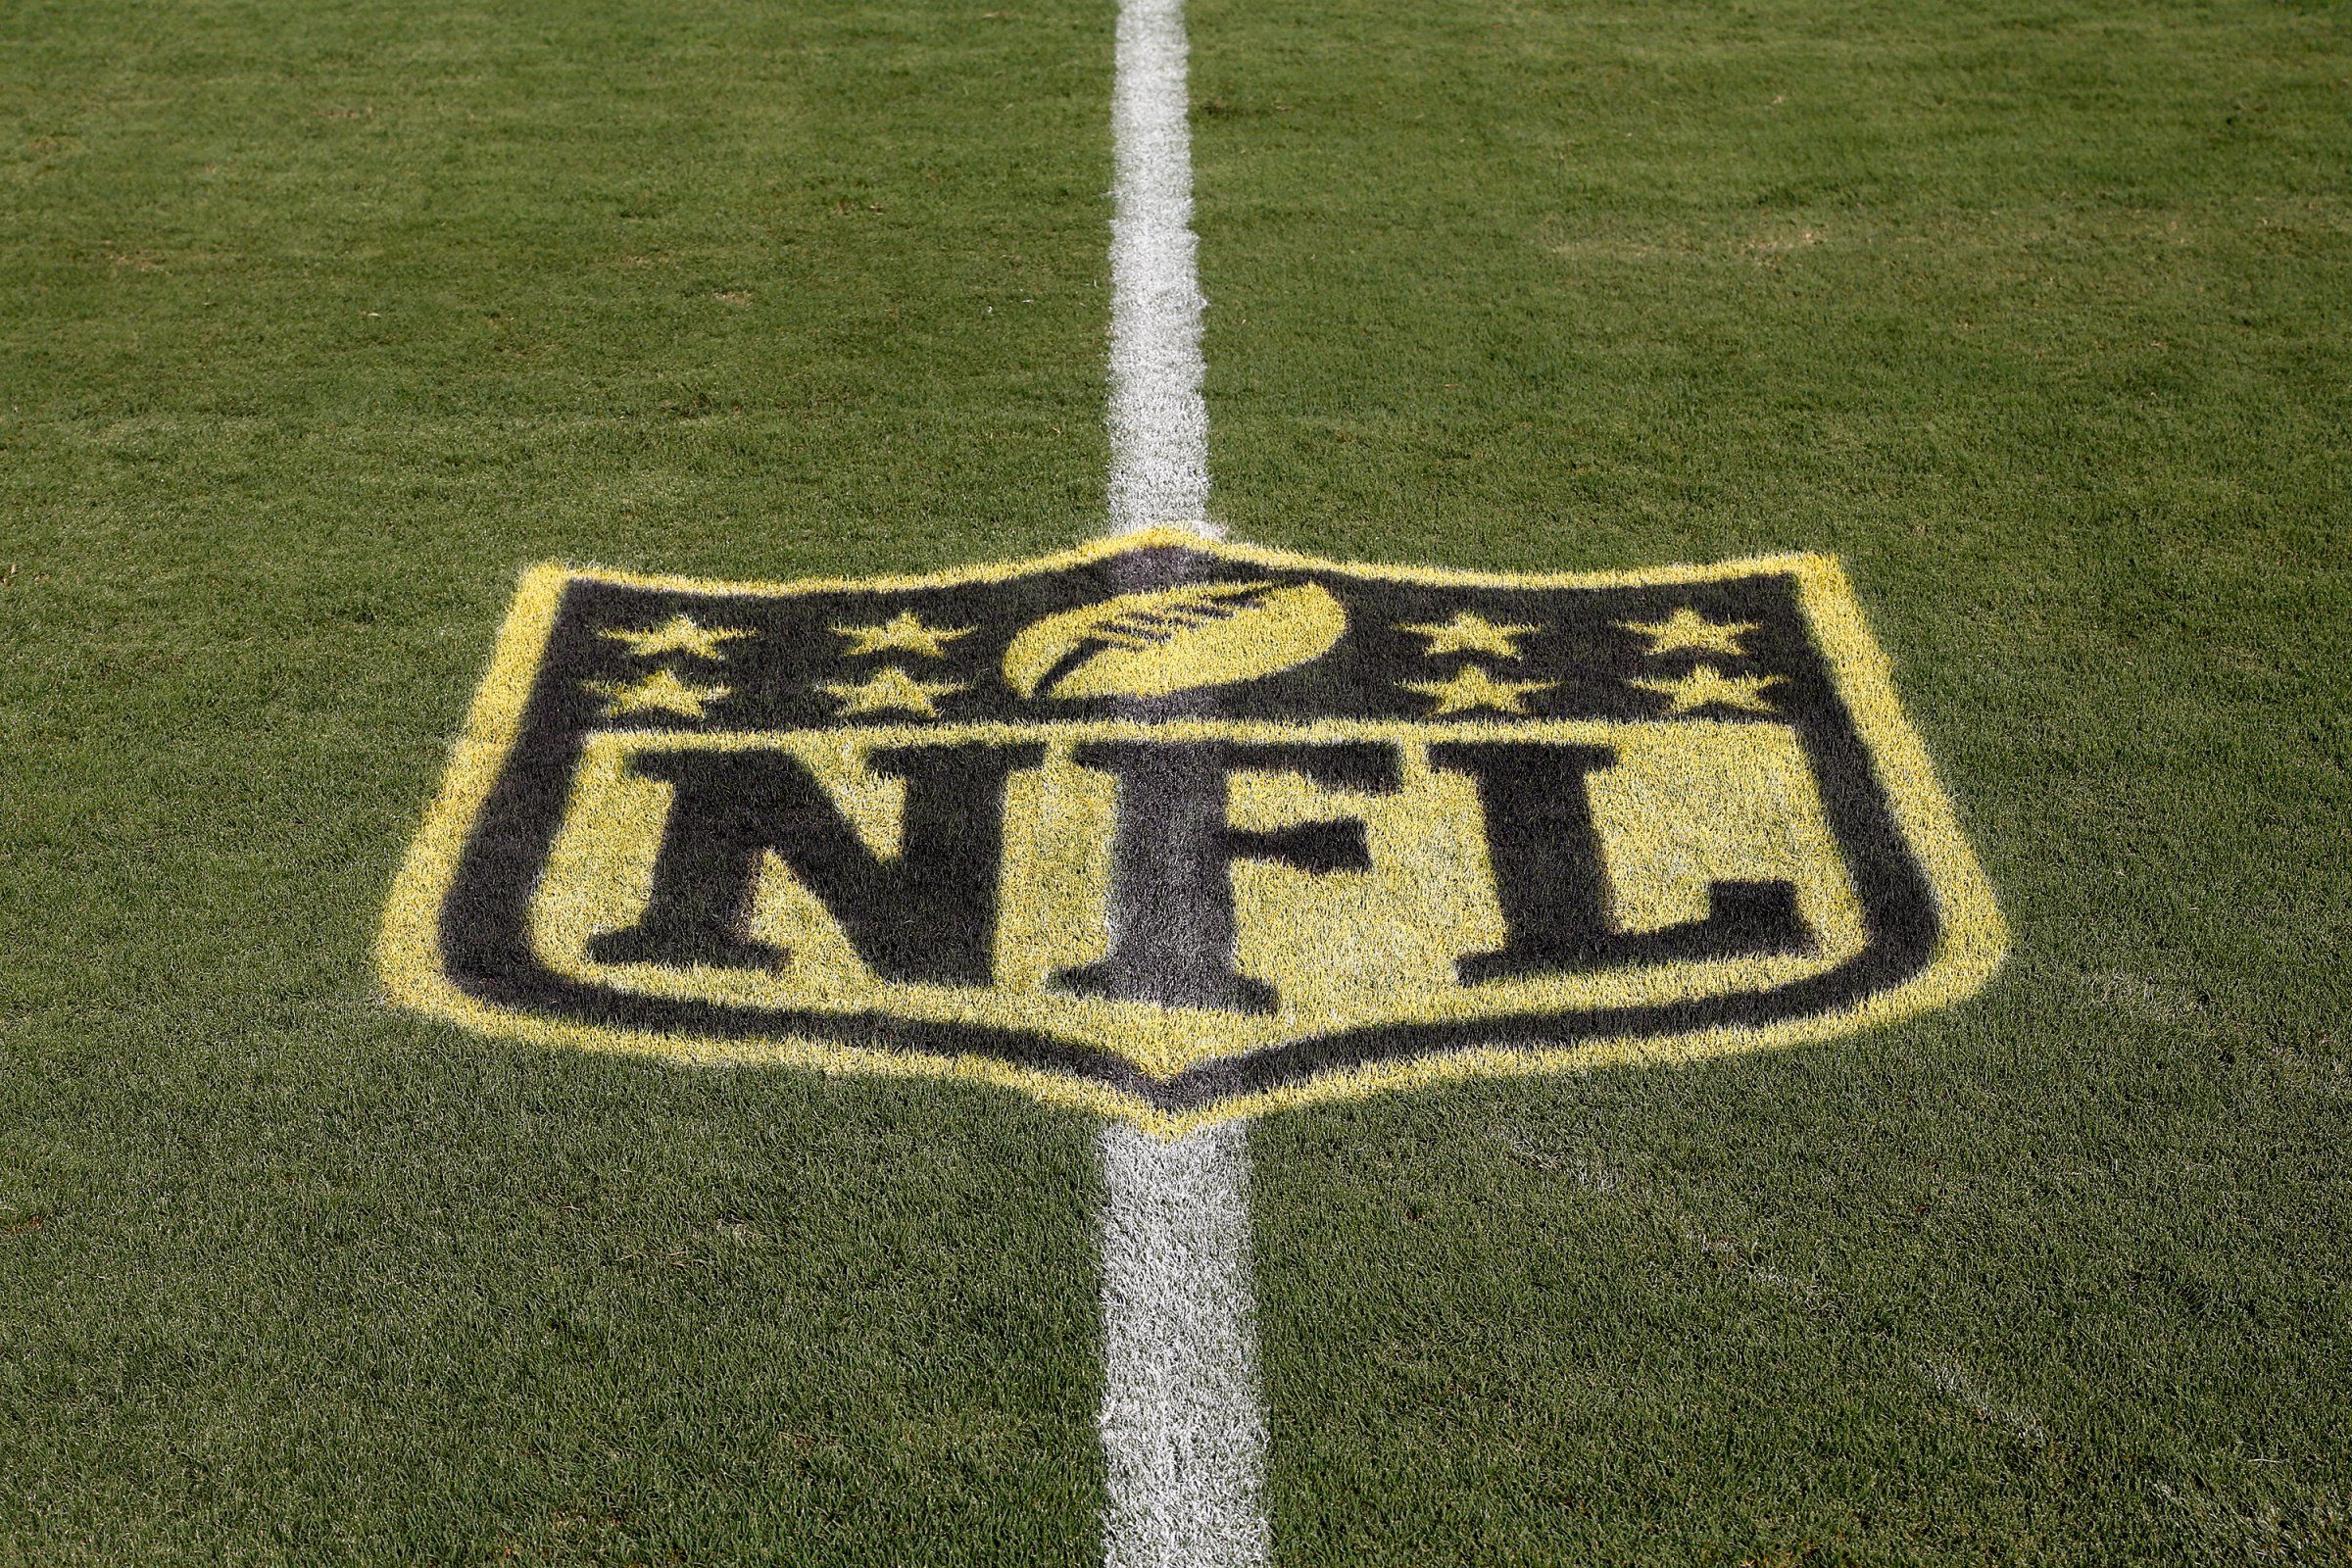 A general view of the gold NFL shield on the field before the Pittsburgh Steelers played against the Jacksonville Jaguars in an NFL preseason football game at EverBank Field on Aug. 14, 2015 in Jacksonville, Fla.